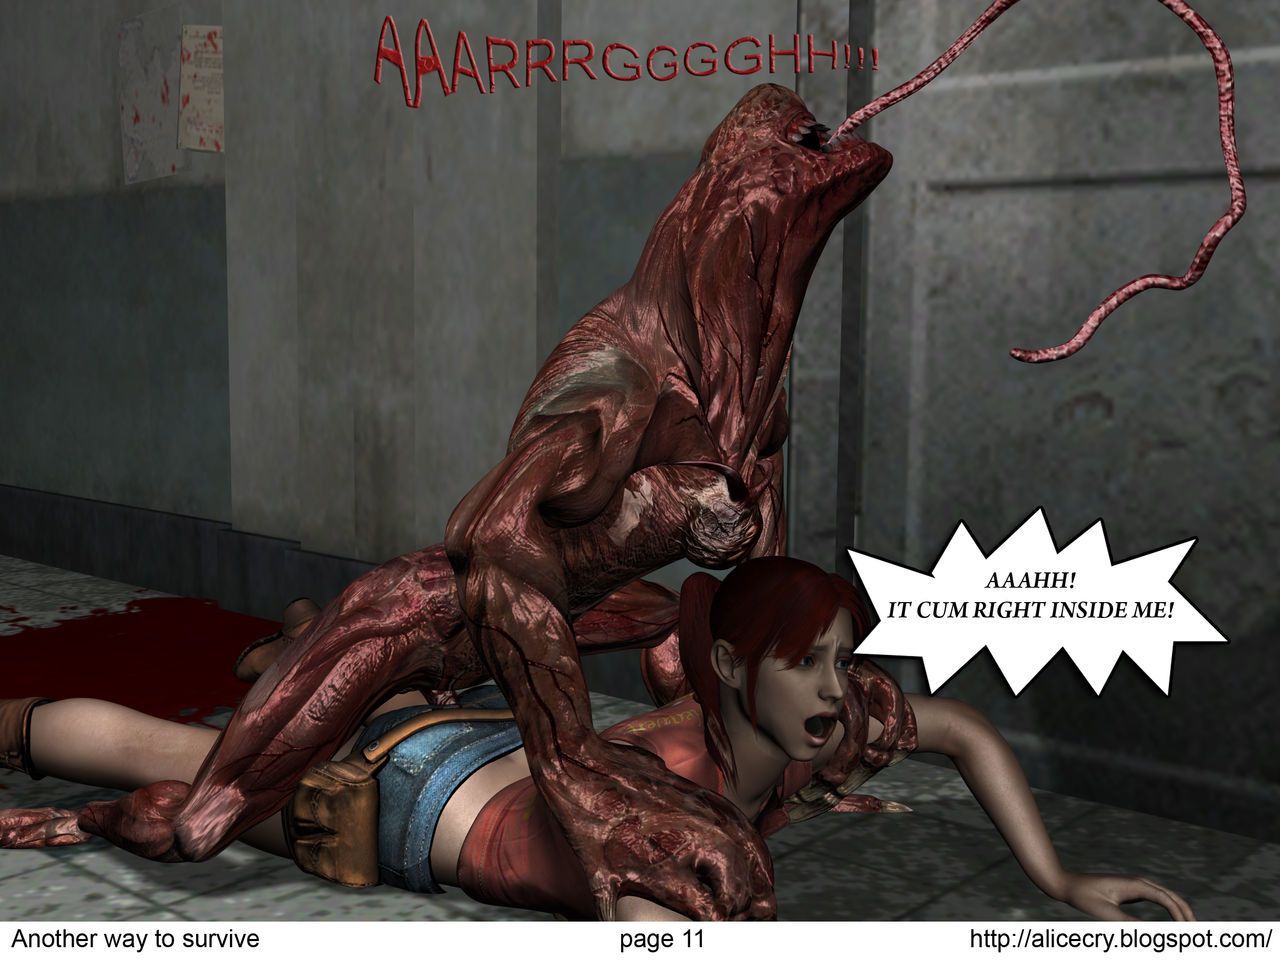 Resident evil: Another way to survive